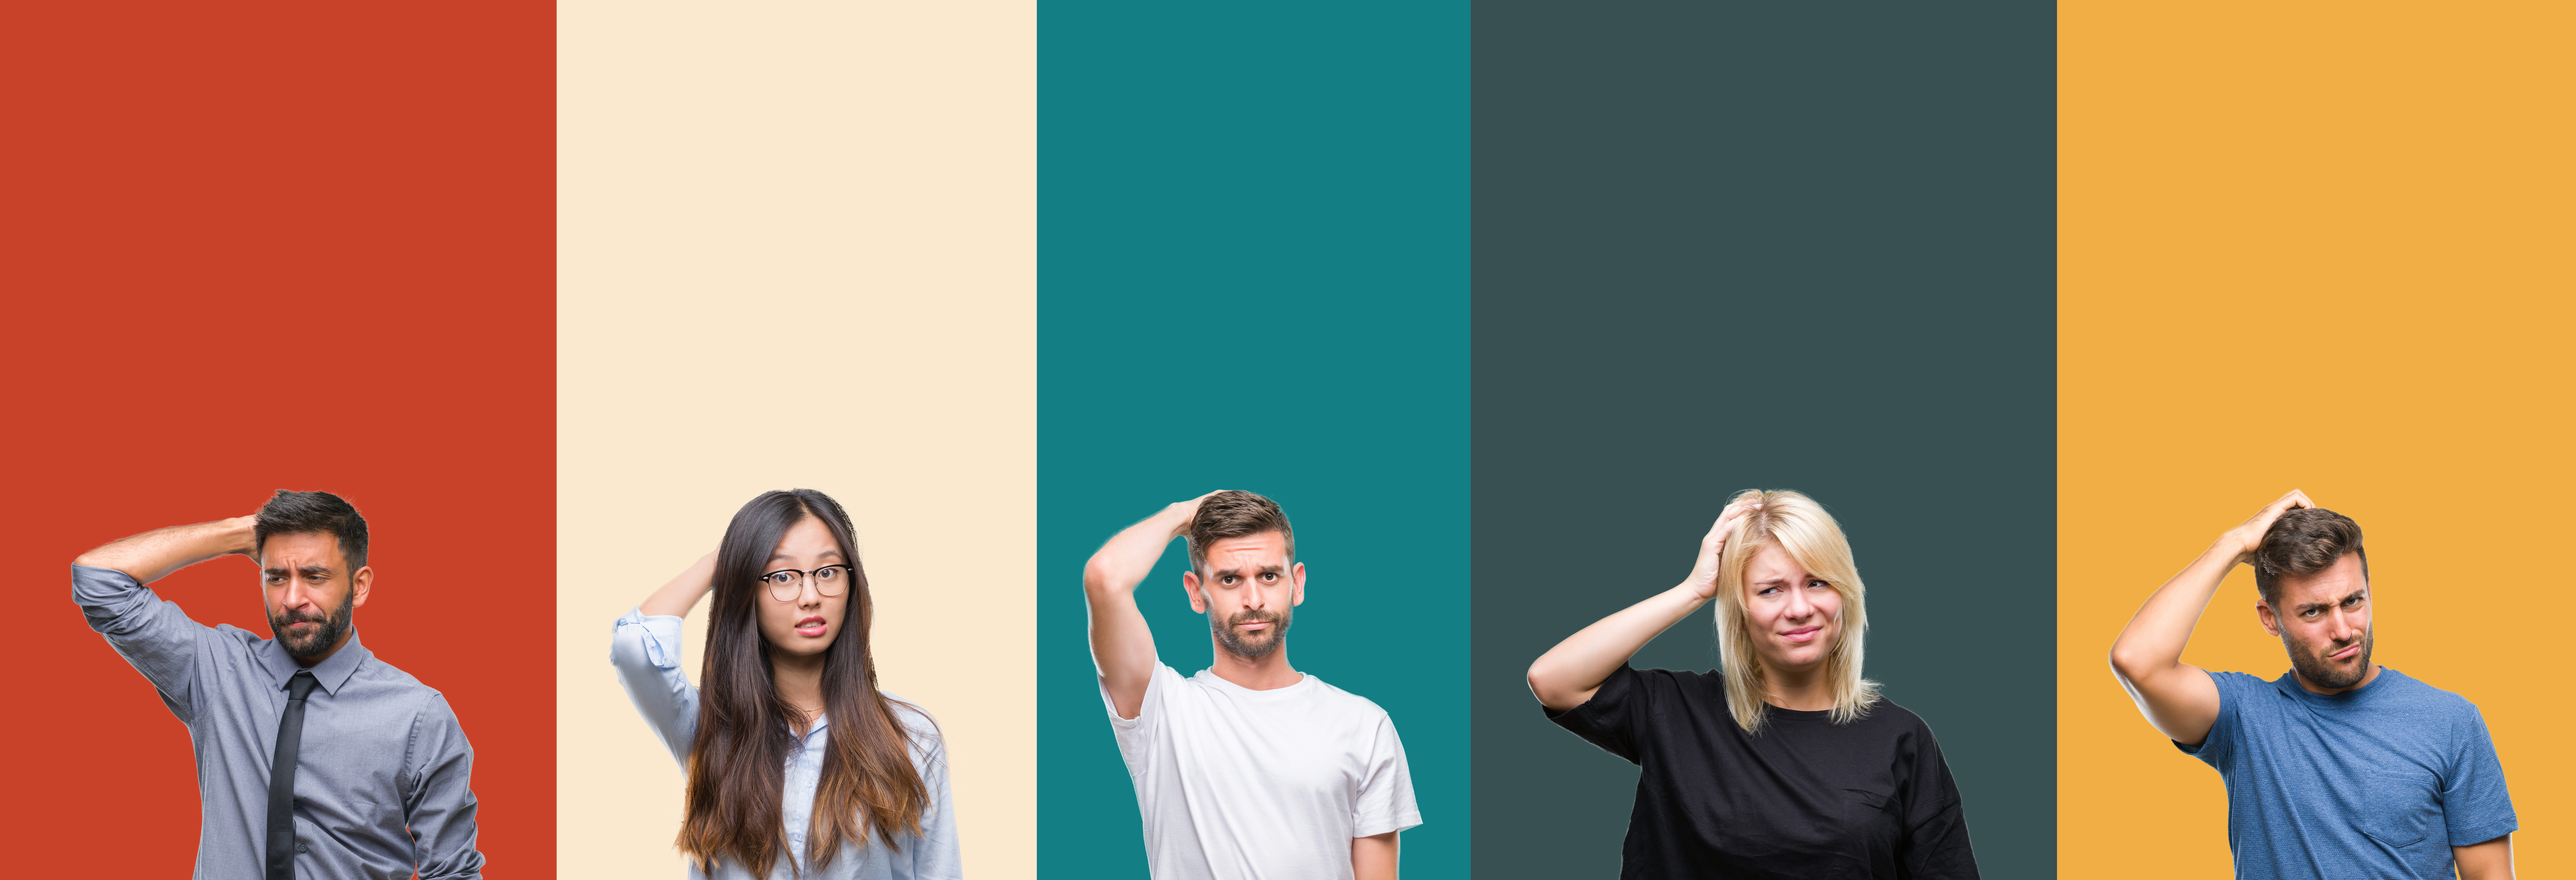 Collage of different ethnics young people over colorful stripes isolated background confuse and wonder about question. Uncertain with doubt, thinking with hand on head. Pensive concept.